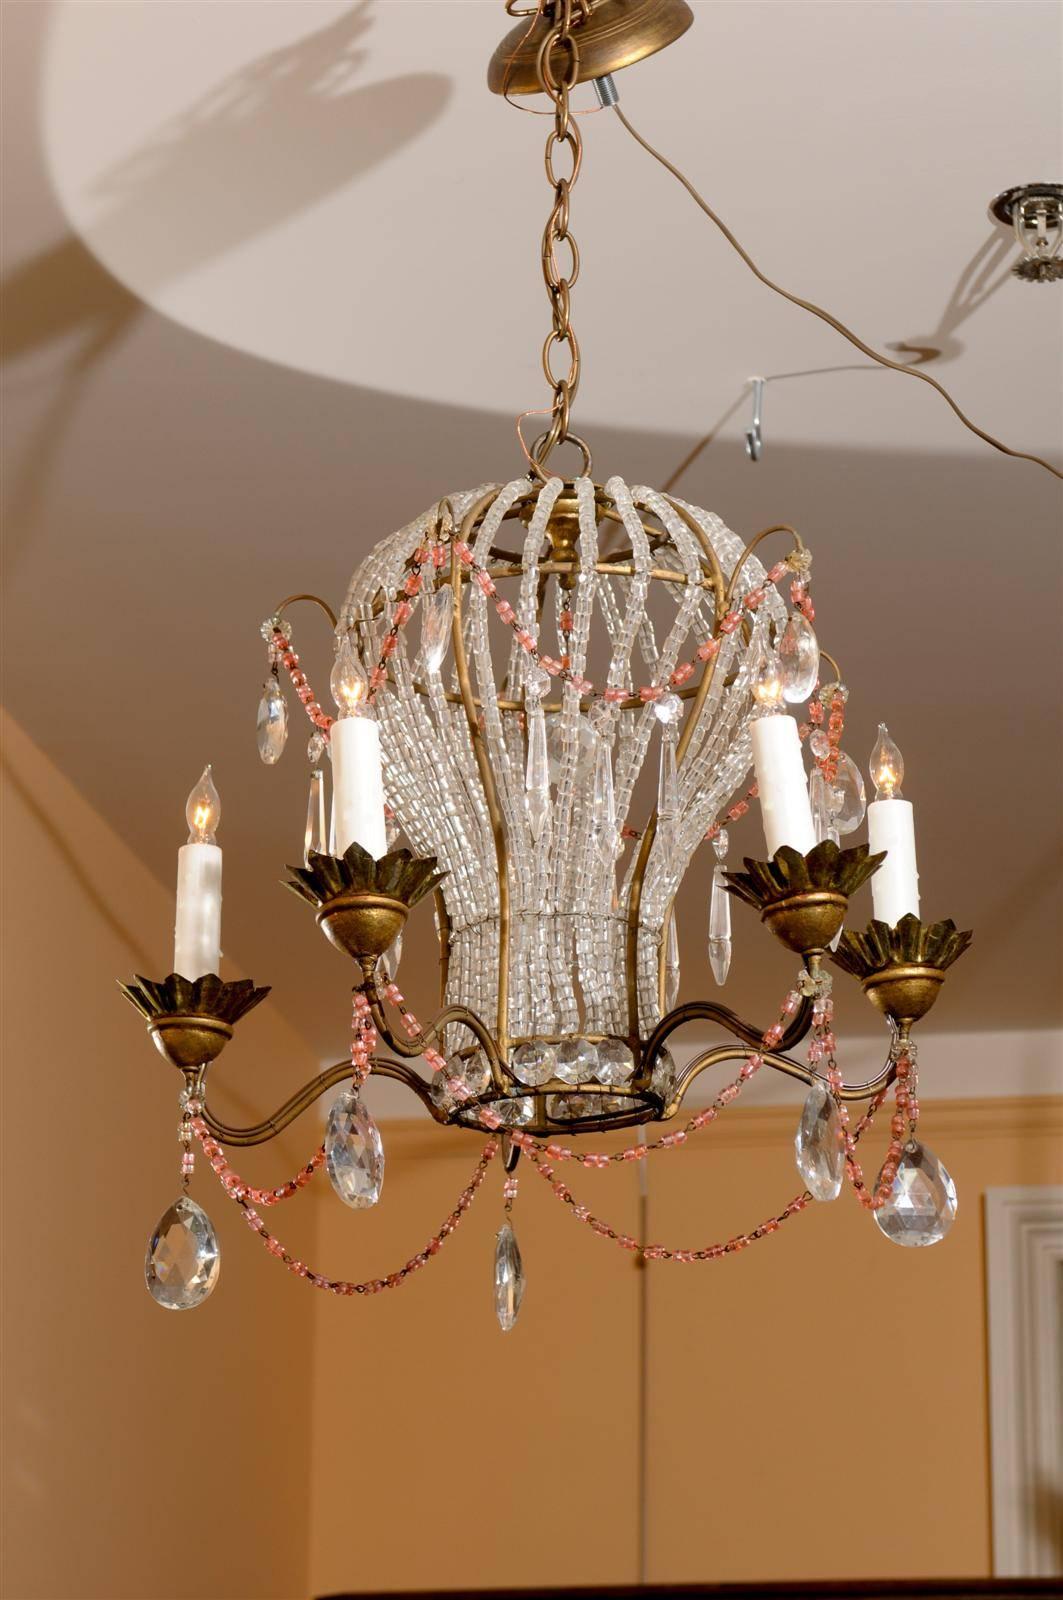 Gilt French Five-Light Balloon Shape Crystal and Glass Chandelier with Colored Beads